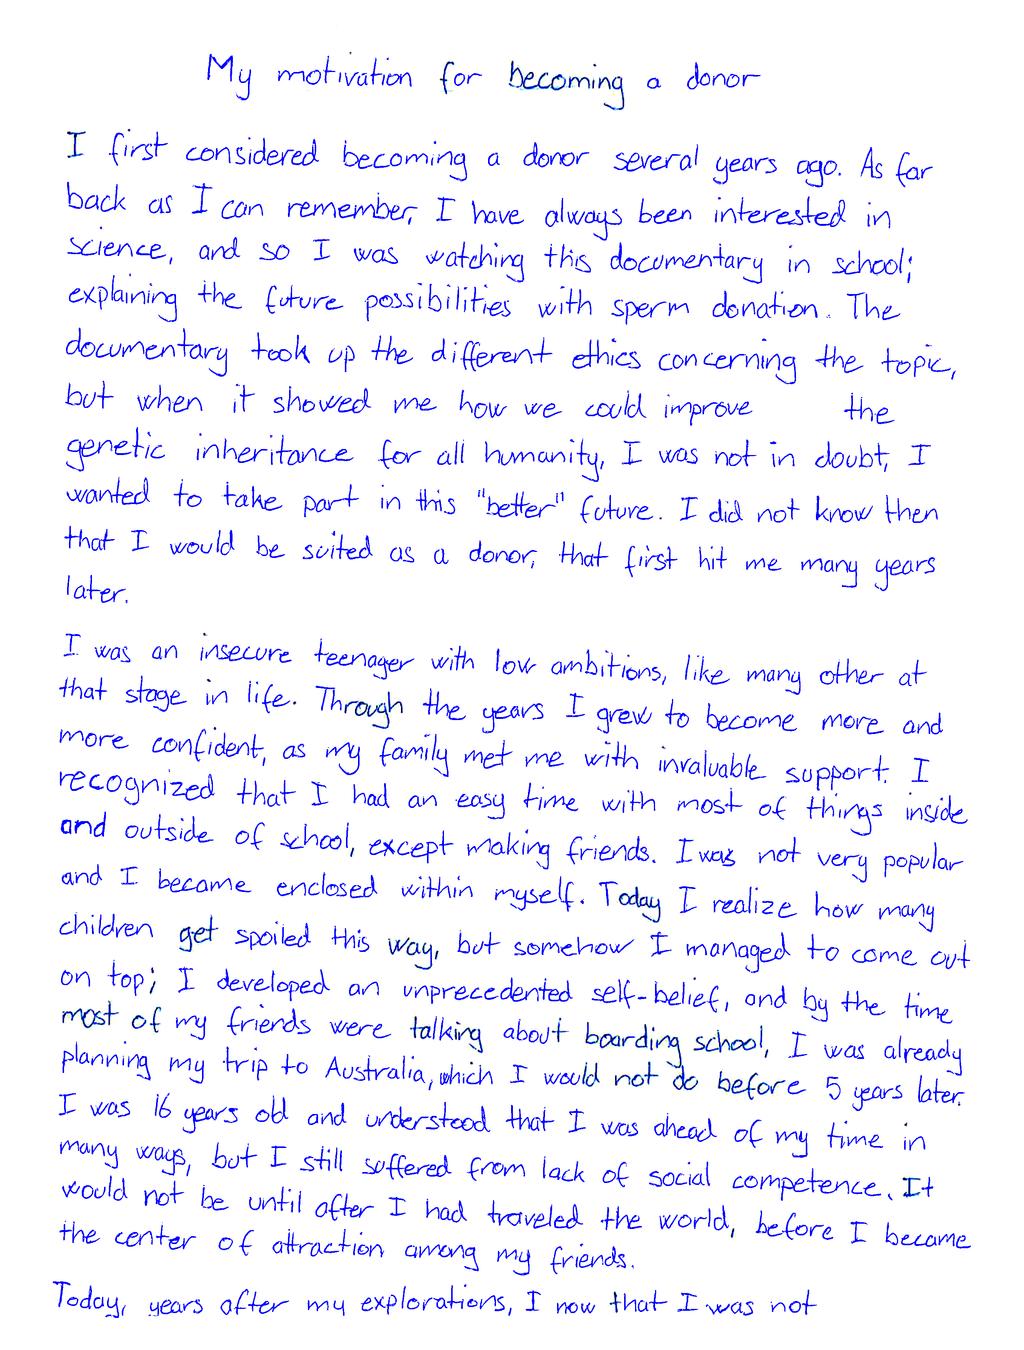 A personal message from MICHEL - page 3 of 4 My